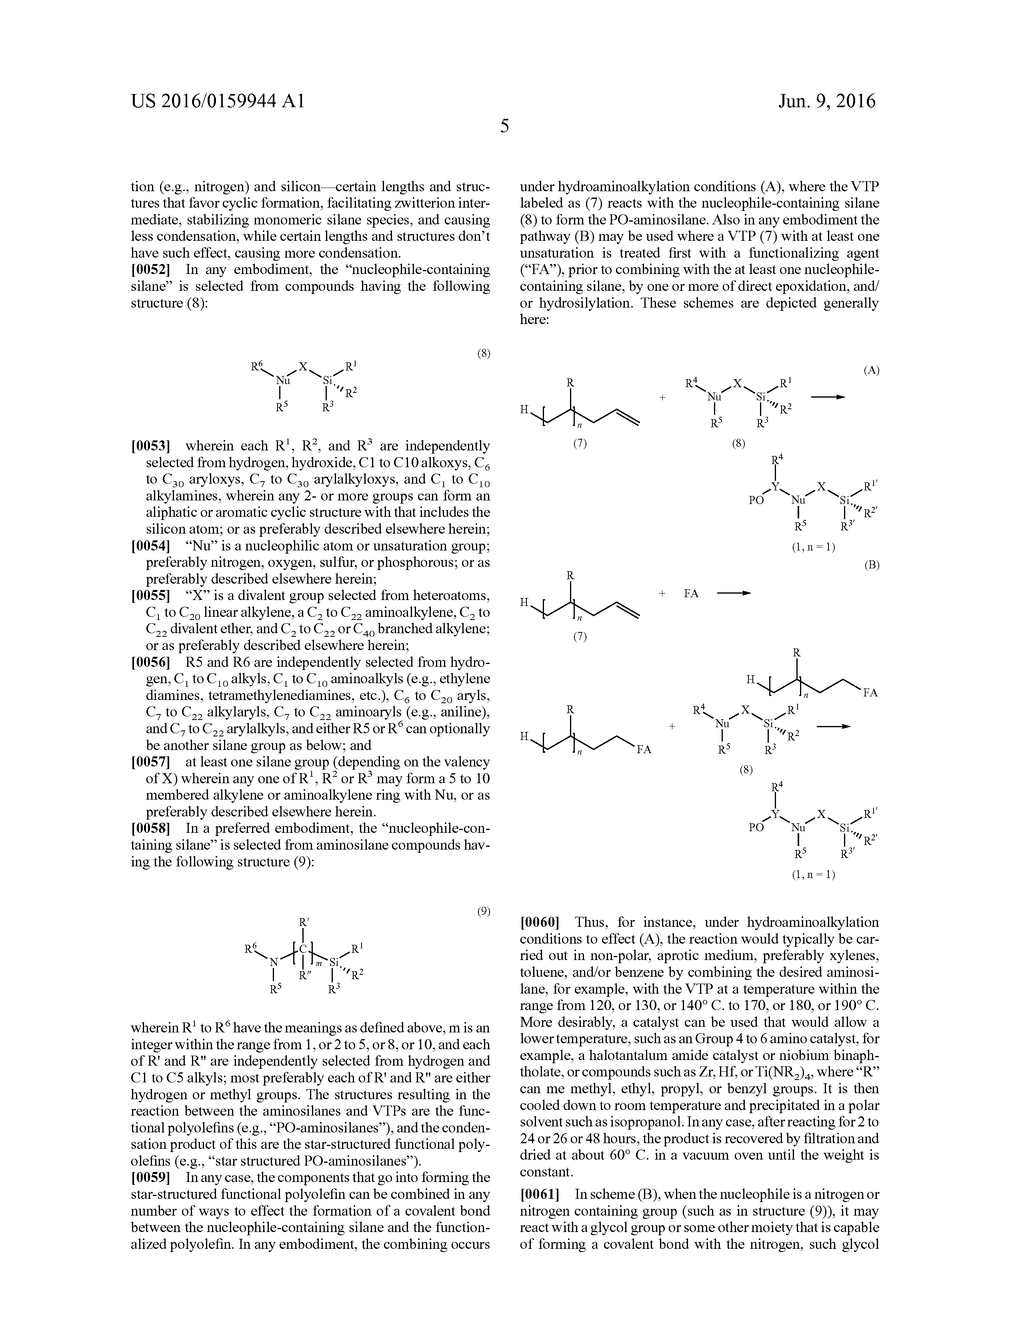 Stable Star-Structured Functional Polyolefins - diagram, schematic, and image 11